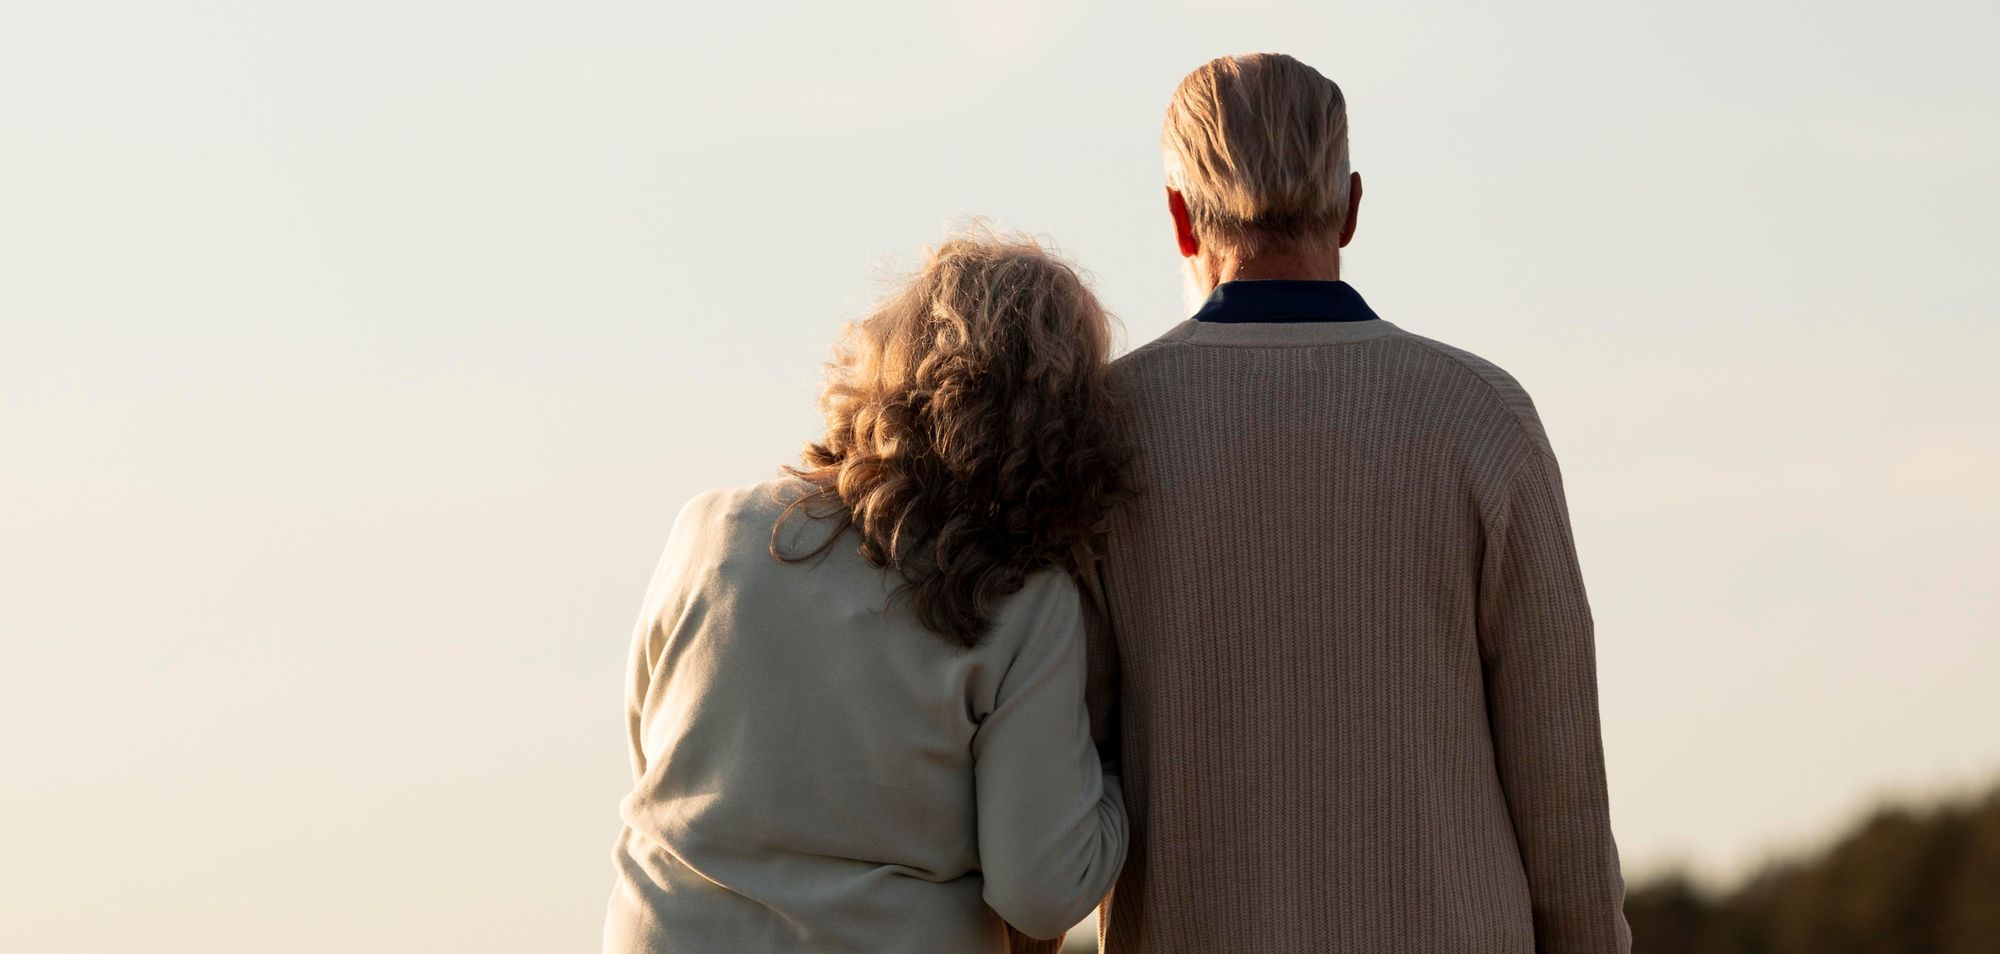 Are more people aspiring to never retire?